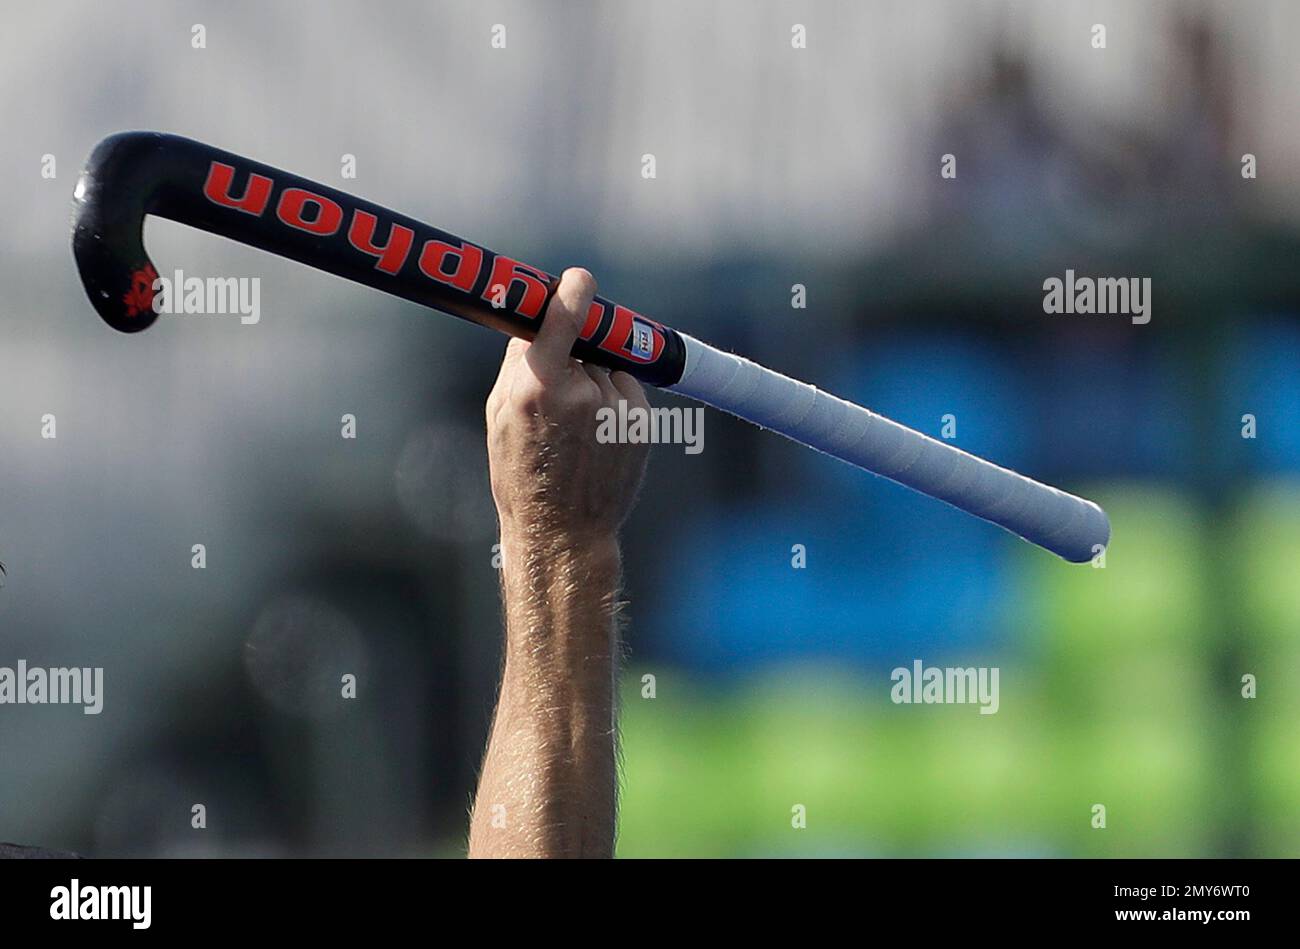 New Zealand's Simon Child, rises his hockey stick as he celebrates his against Spain during a men's field hockey match at 2016 Summer Olympics in Rio de Brazil, Tuesday, Aug.